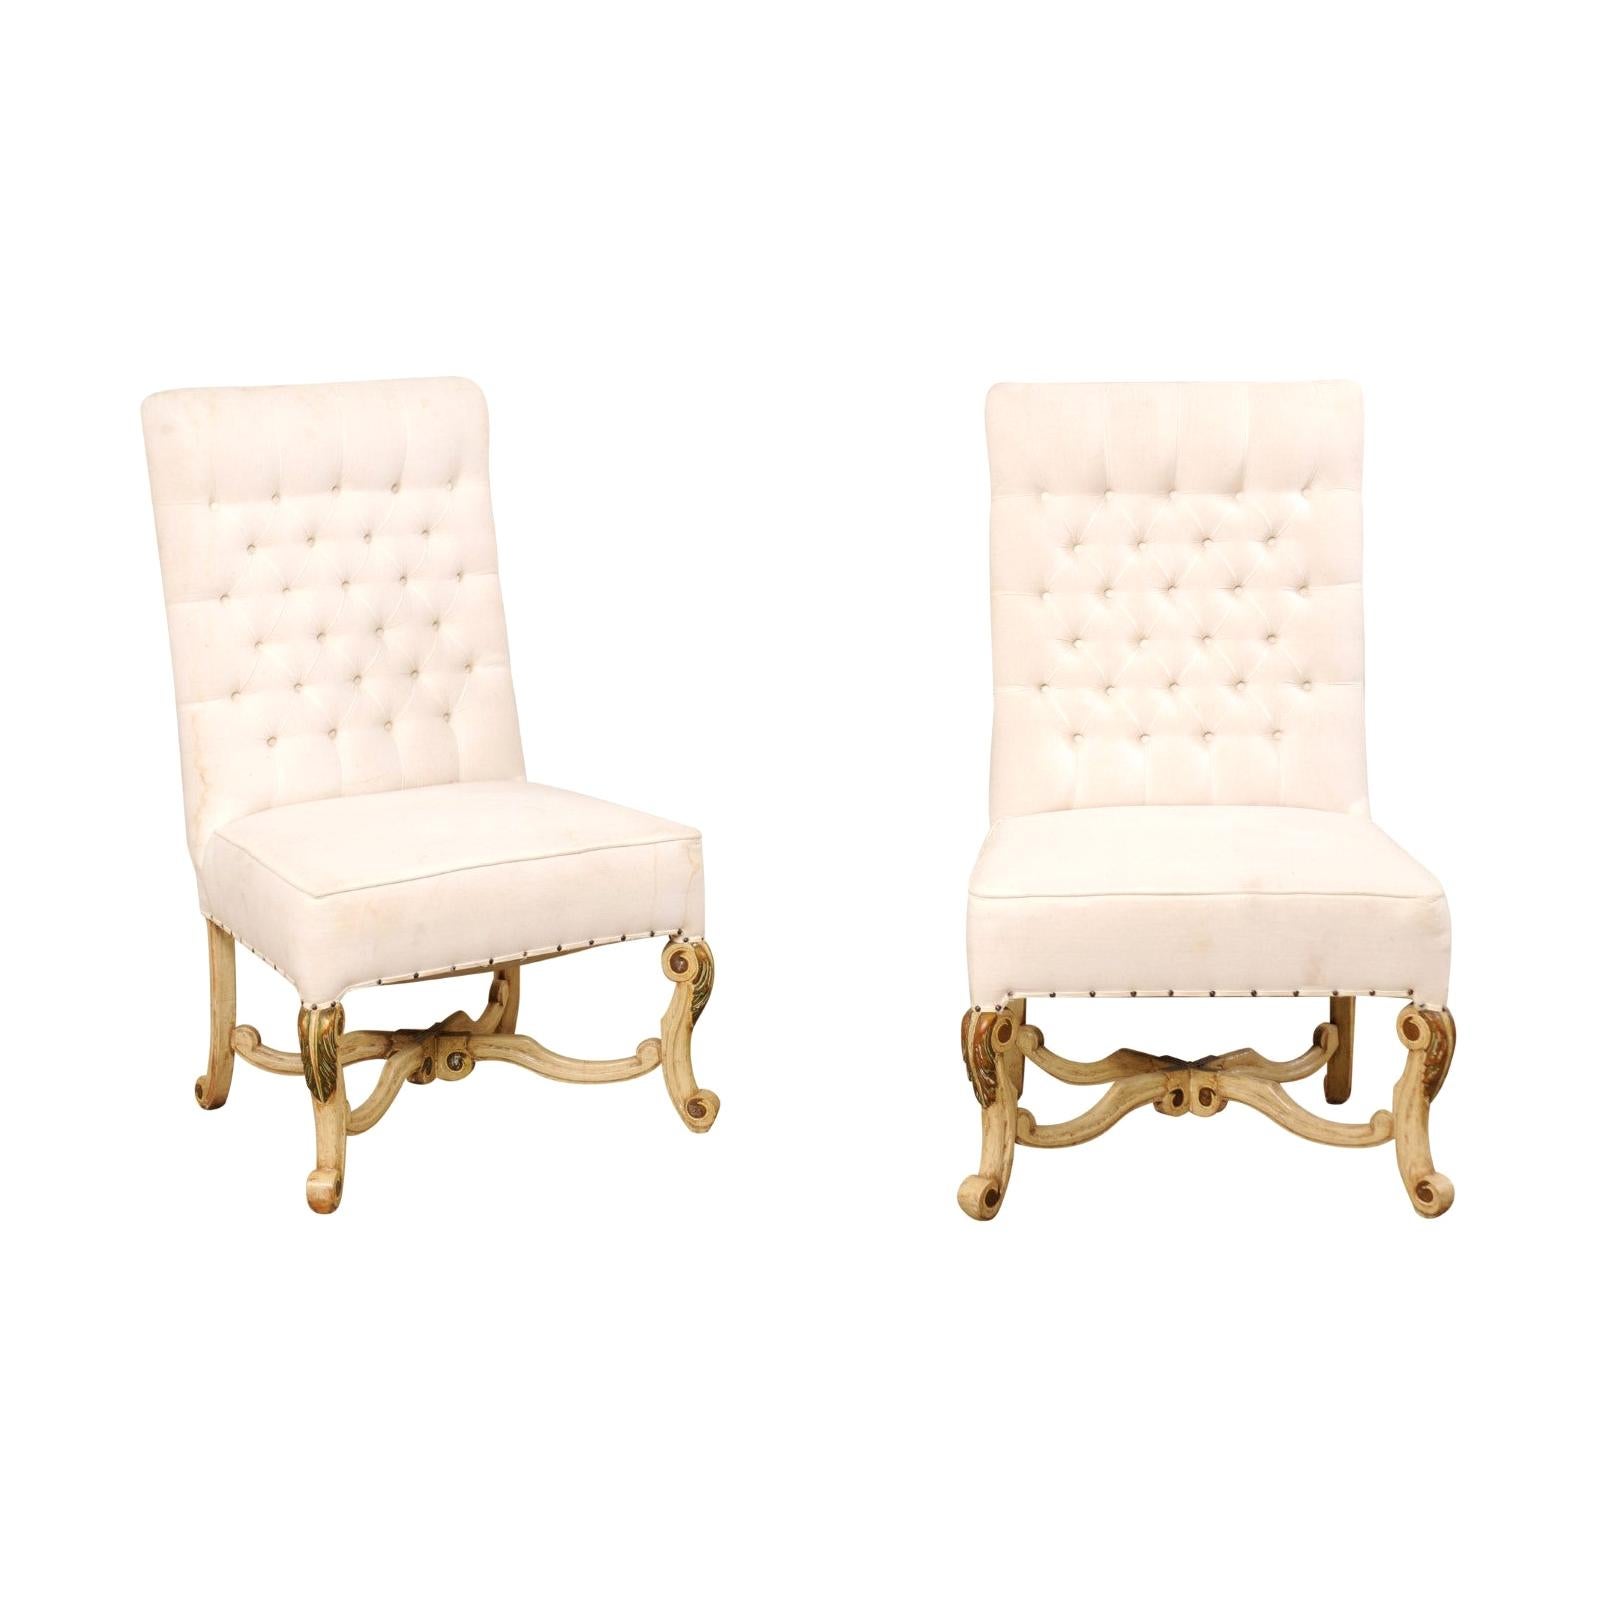 Pair of High Back Chairs with Tufted Backs and Nicely Carved Legs